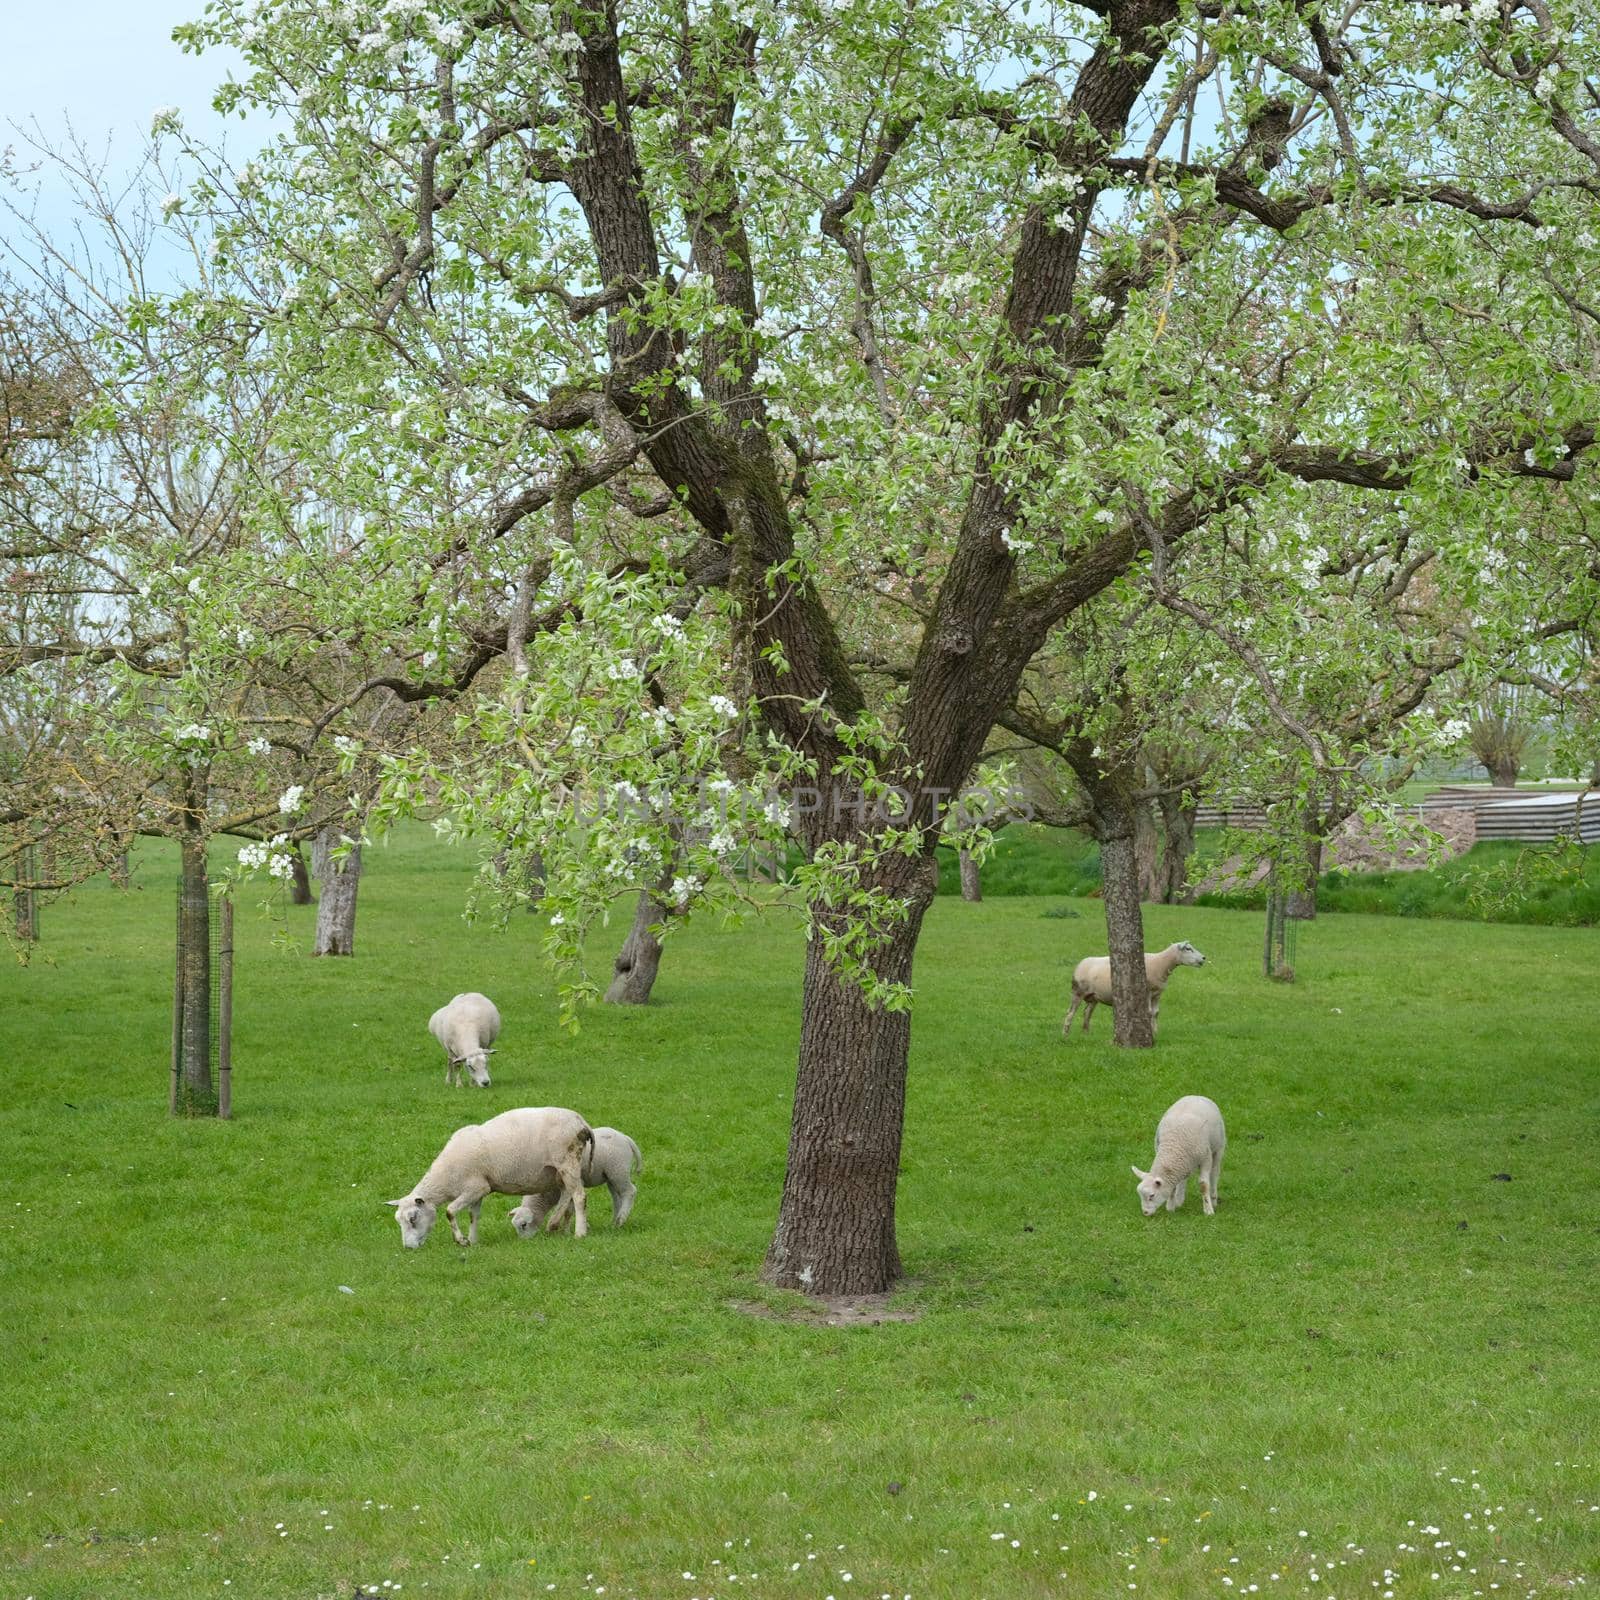 sheep and lambs in spring orchard under blue sky with blossoming trees near Gouda in holland